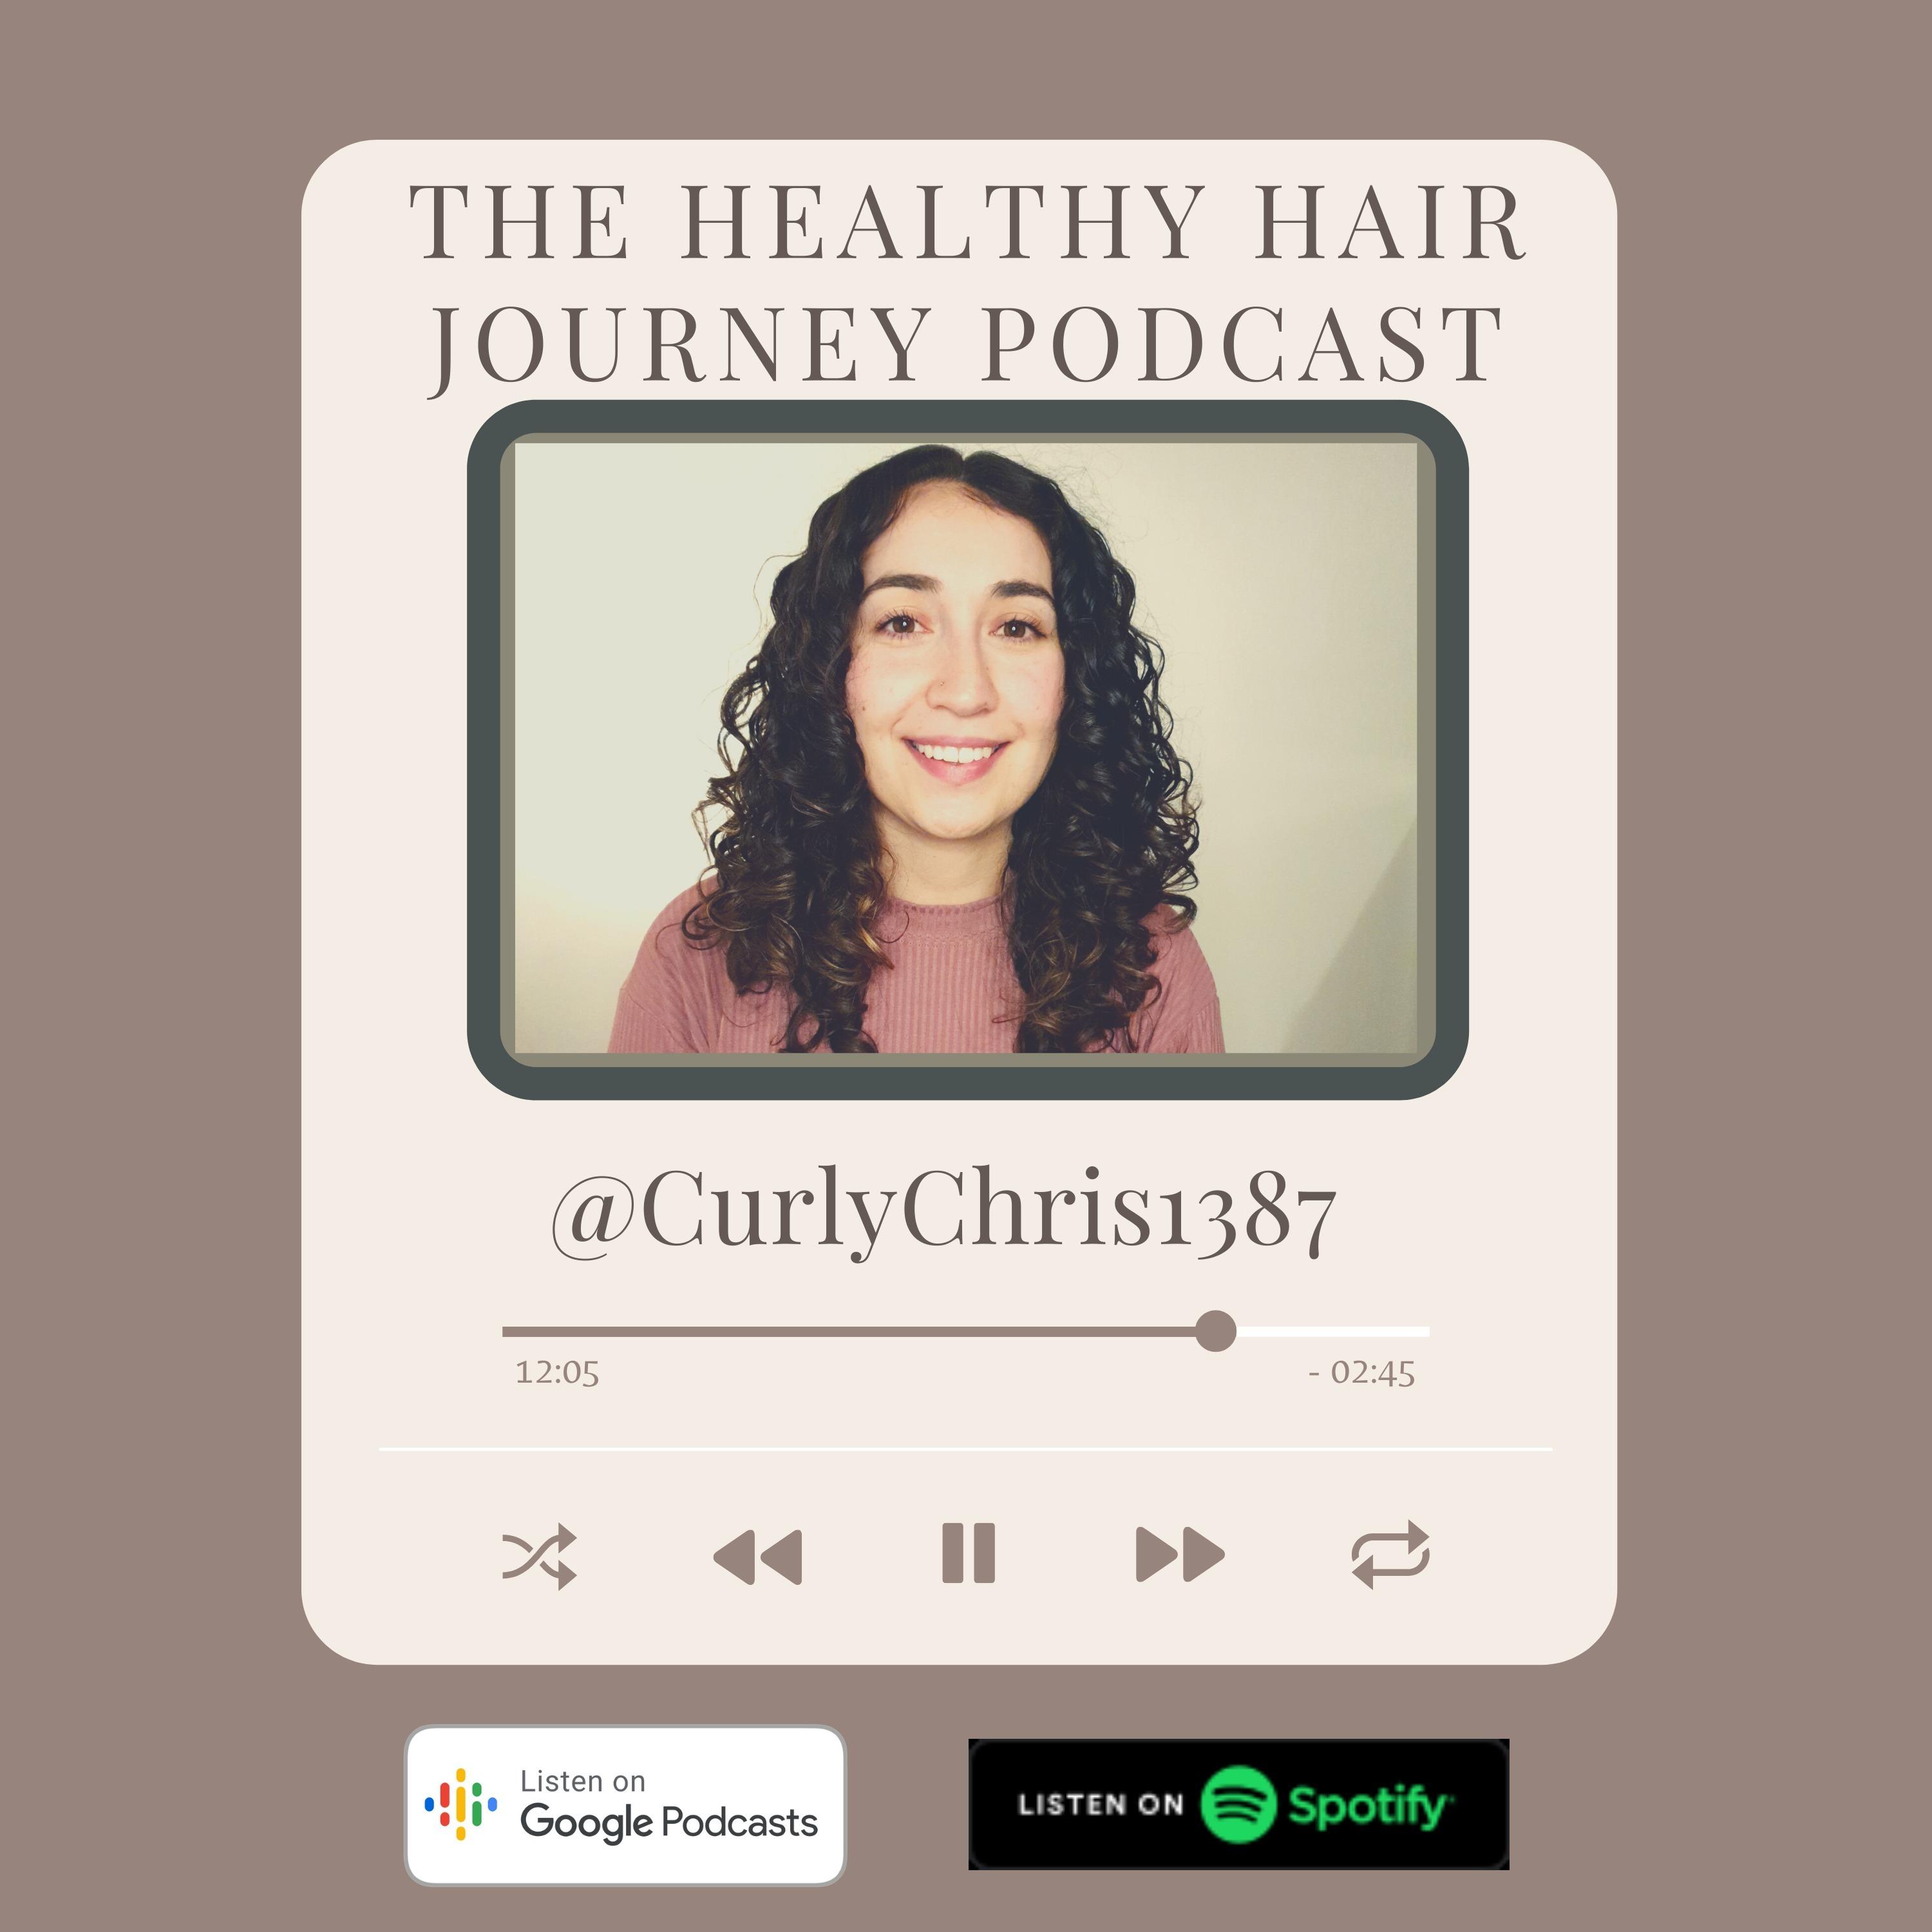 The Healthy Hair Journey Podcast